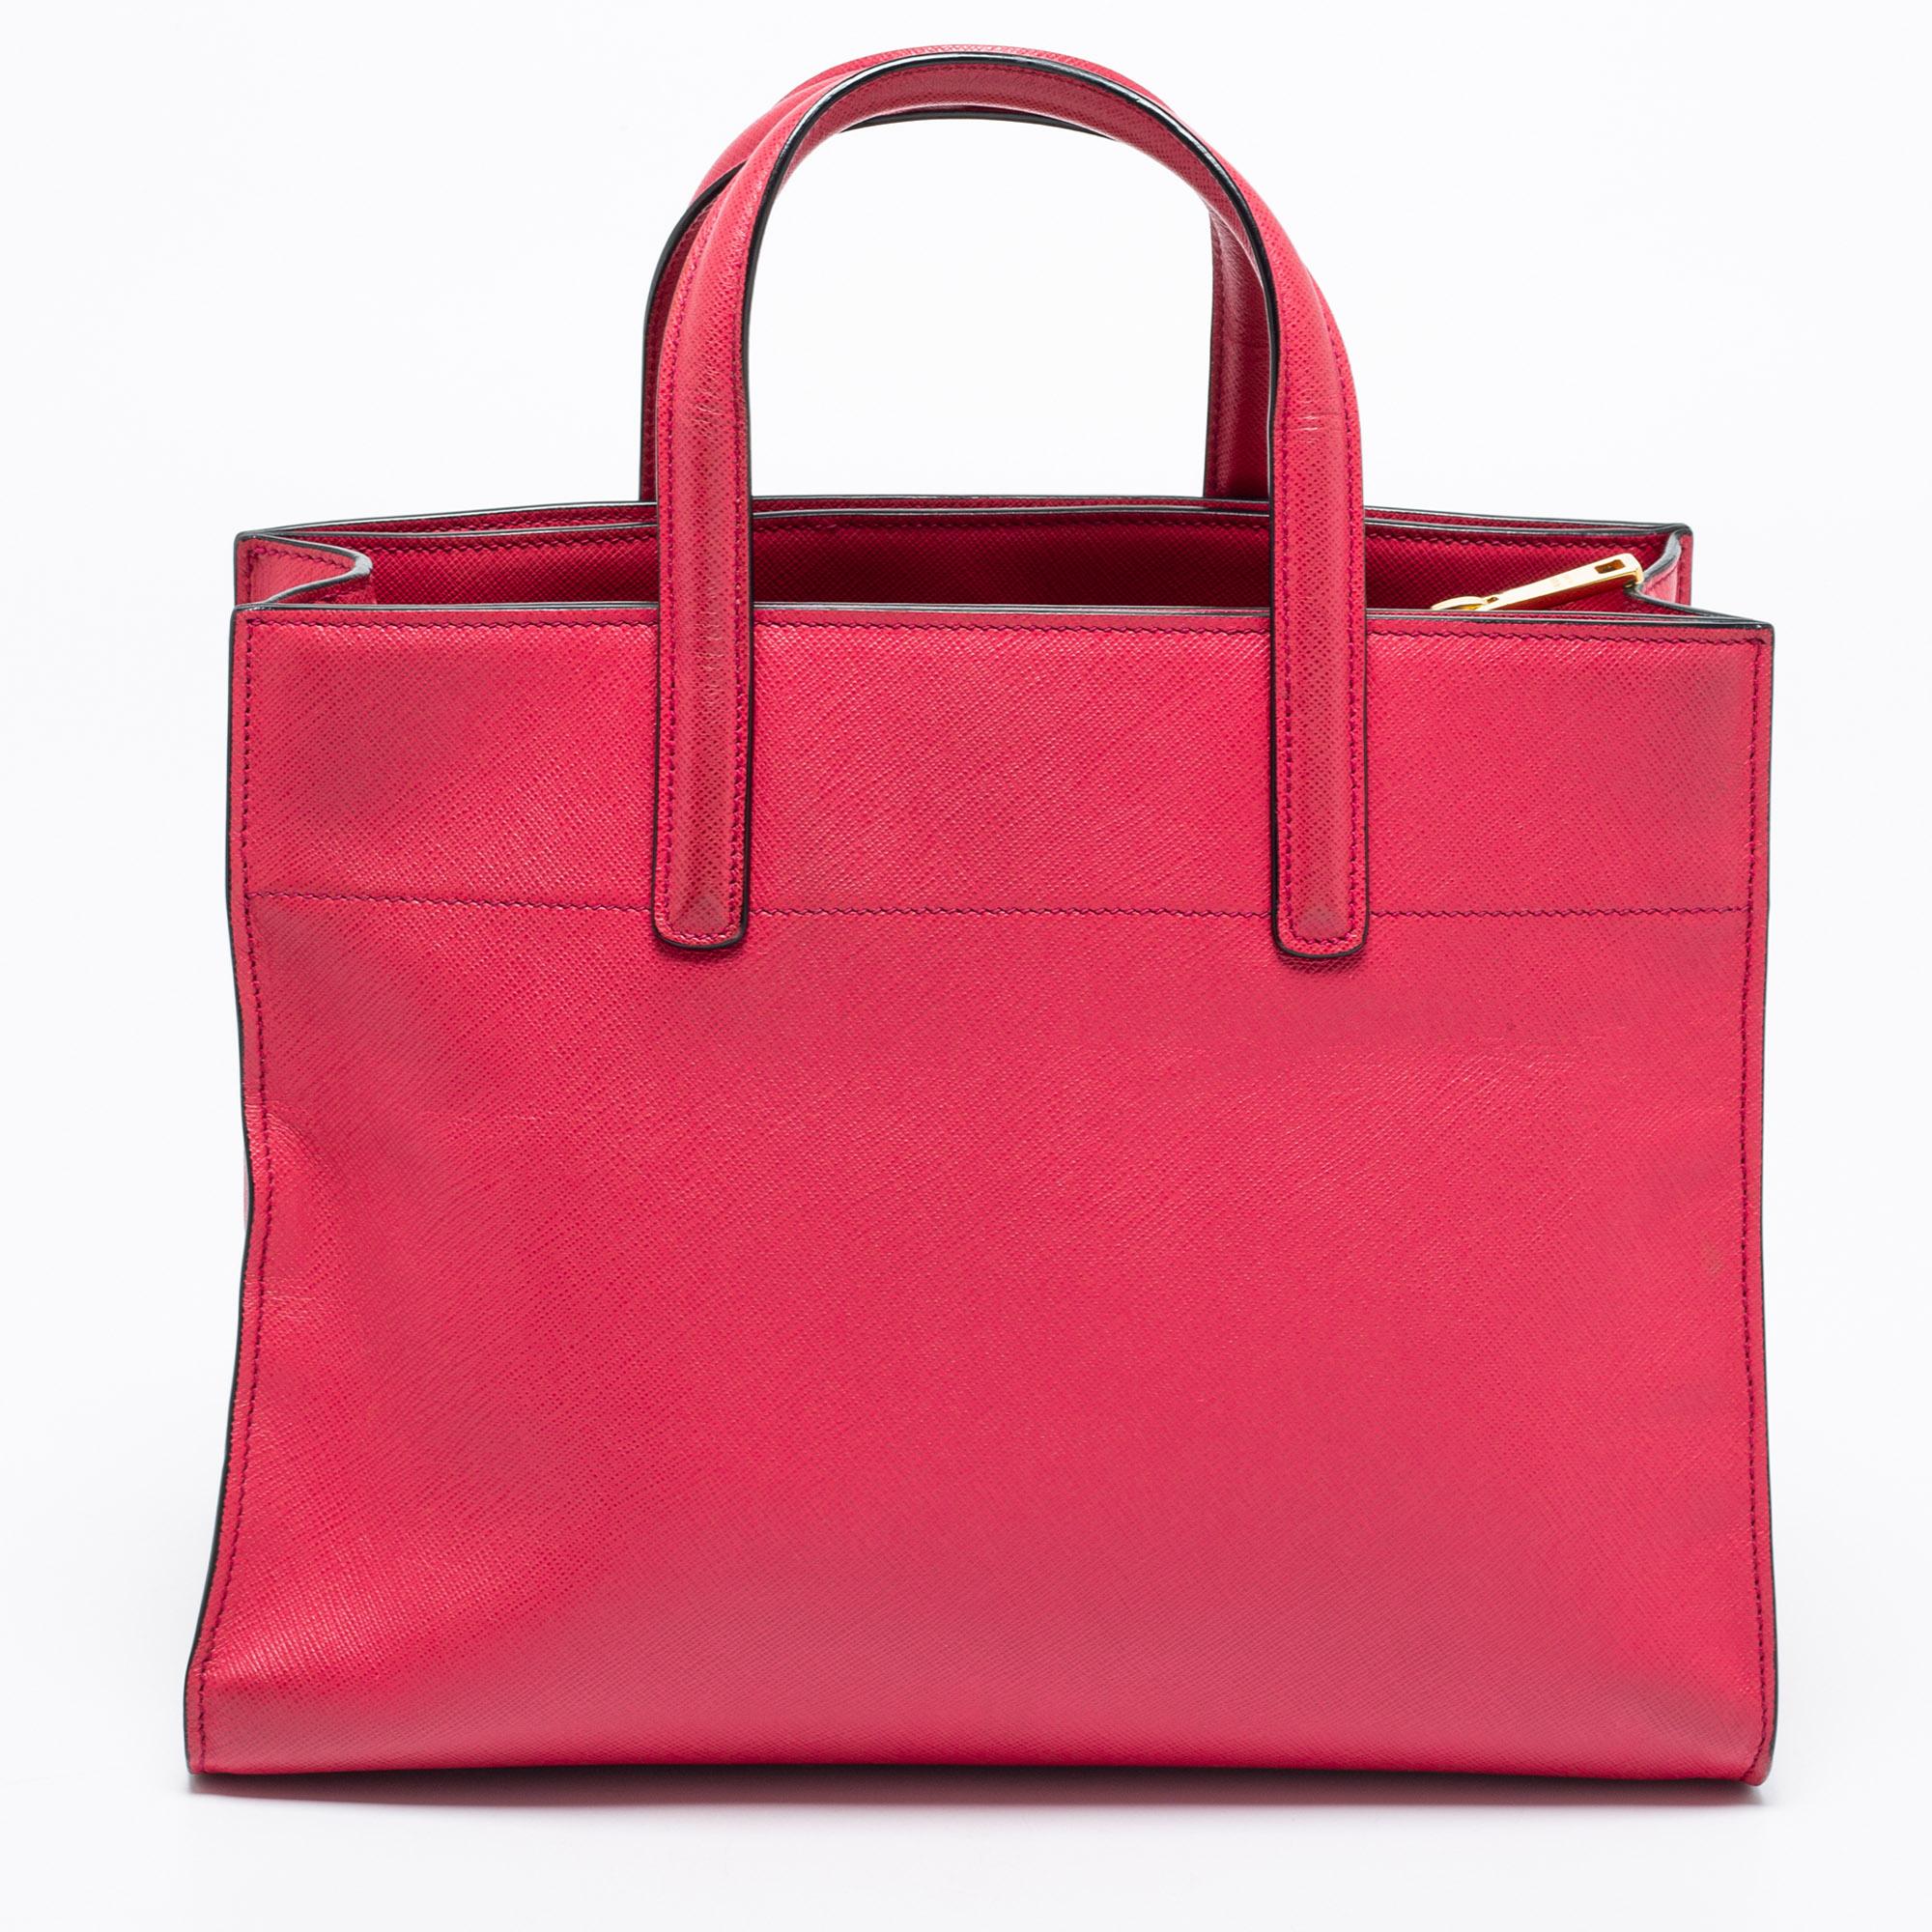 This tote from the House of Prada is great for everyday use. It is made from pink Saffiano Soft leather, which is embellished with gold-tone hardware. It showcases dual handles and a leather-nylon interior. This tote will make you look classy and